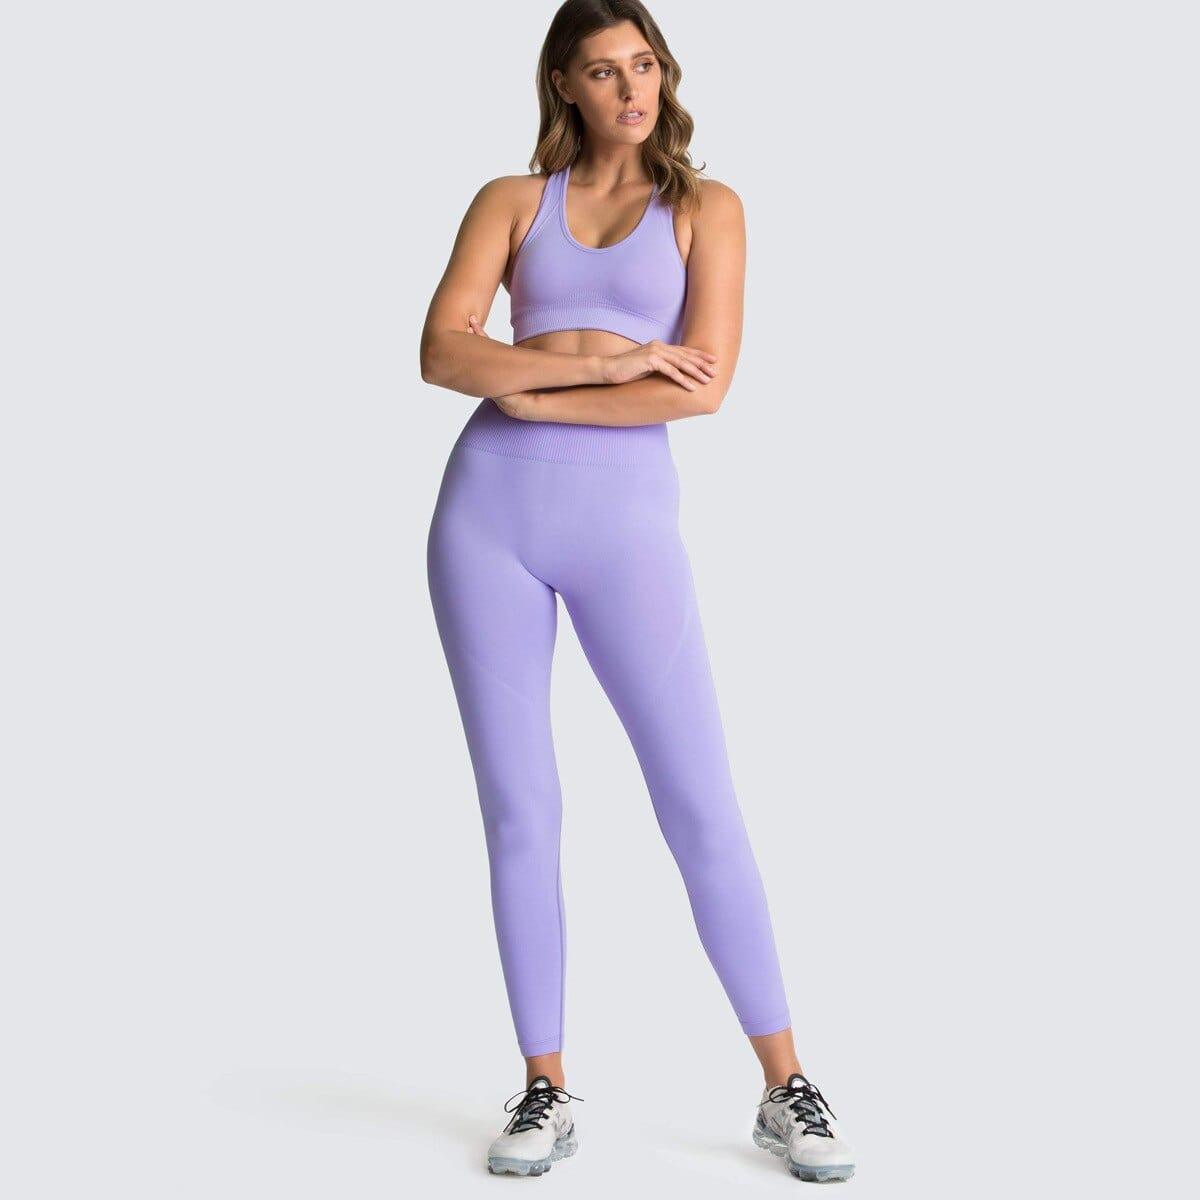 Shop 0 violet suit / S Two Piece Set Women Sportswear Workout Clothes for Women Sport Sets Suits For Fitness Long Sleeve Seamless Yoga Set Leggings Mademoiselle Home Decor